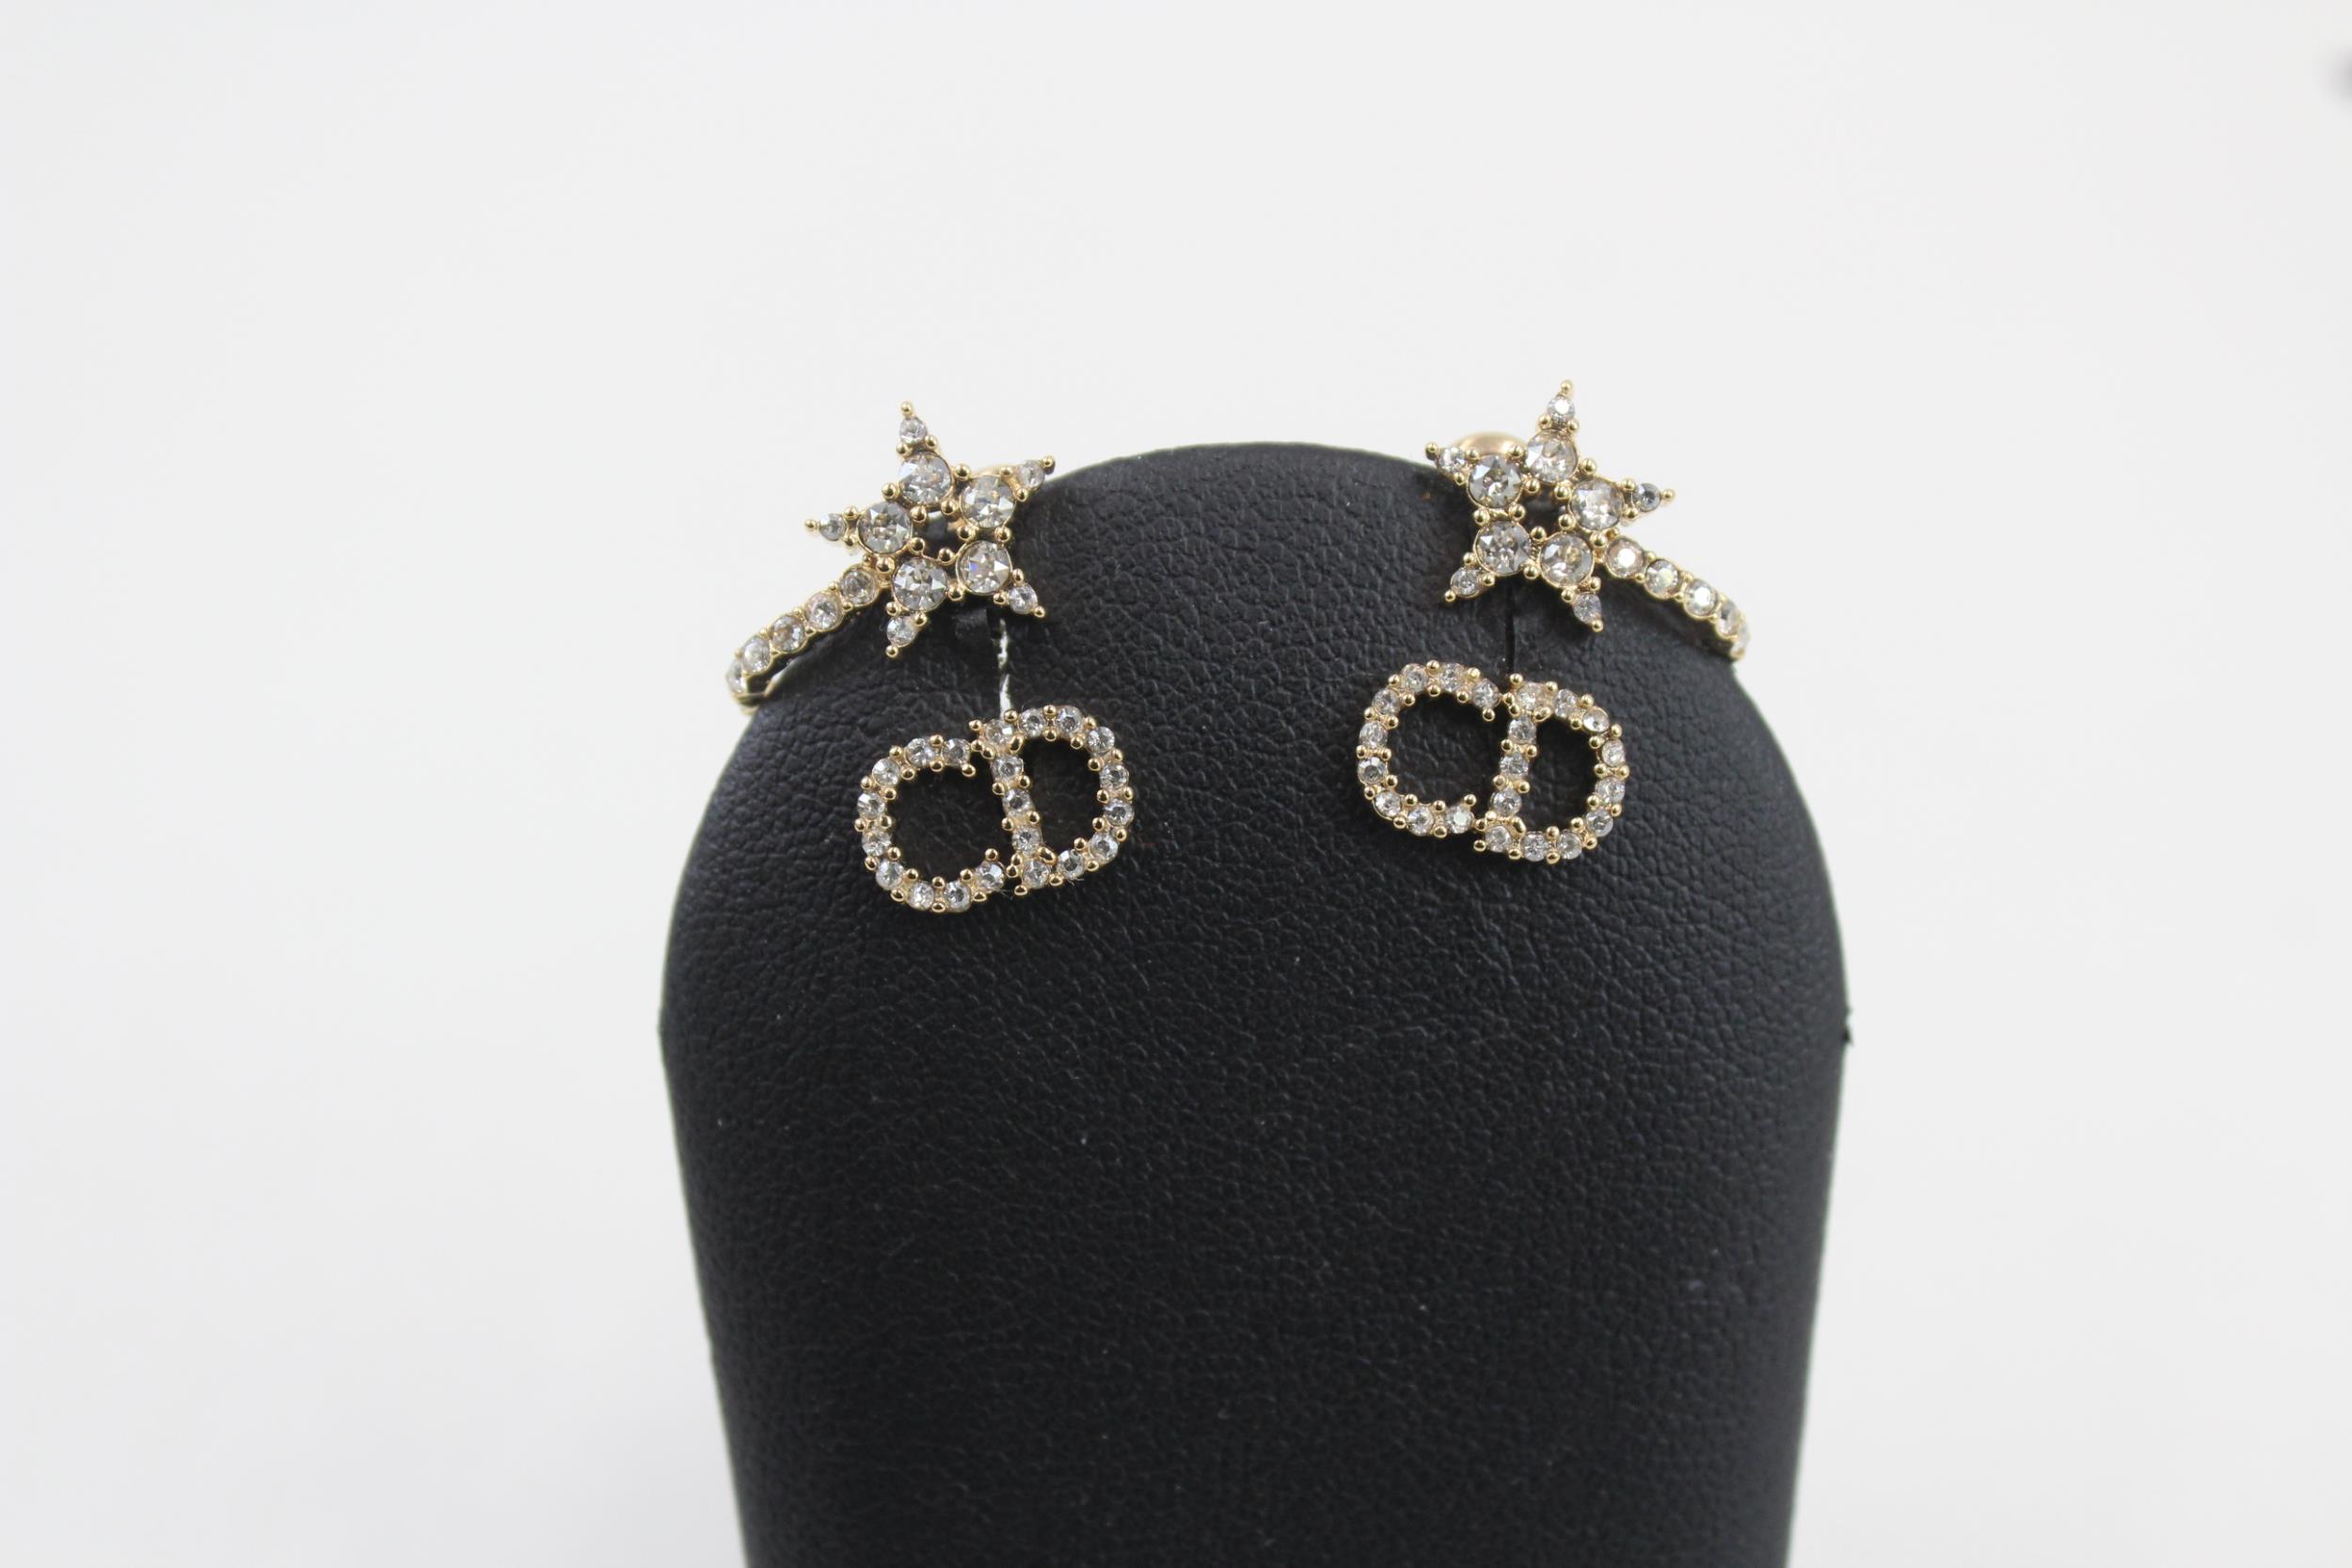 Pair of gold tone rhinestone earrings by designer Christian Dior with pouch (3g) - Image 2 of 7